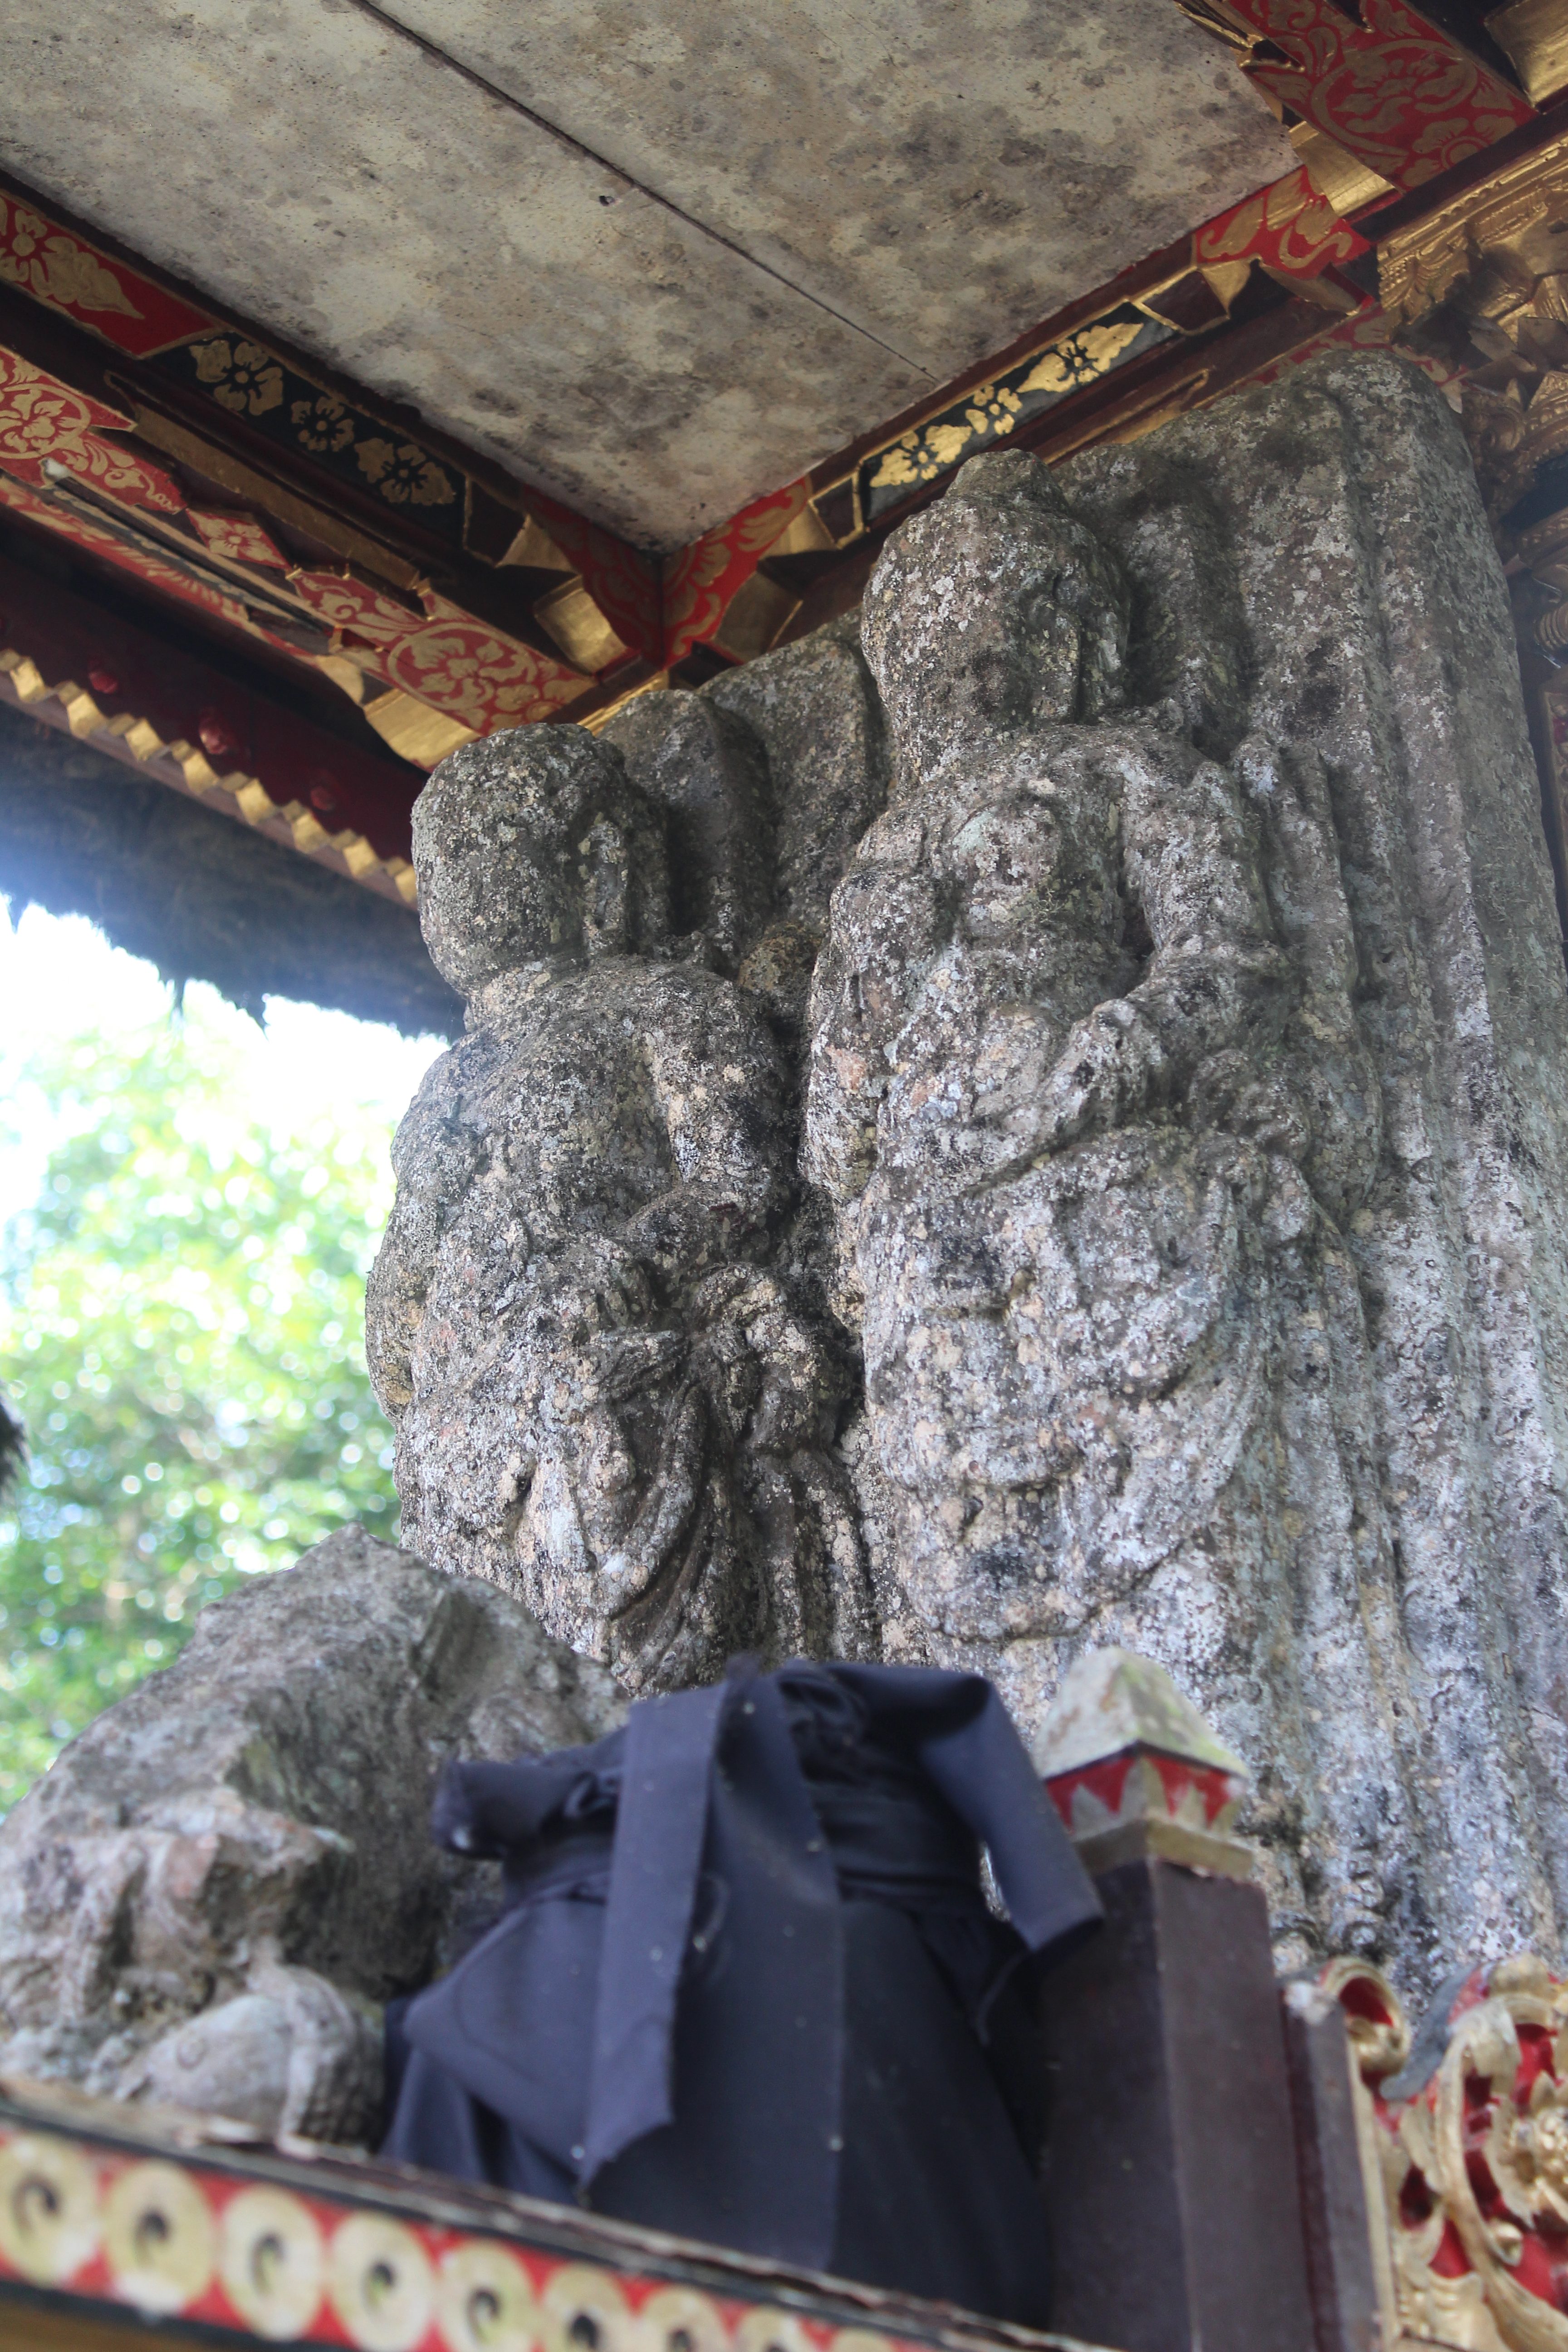 Pair of weathered figural sculptures in a tall shrine